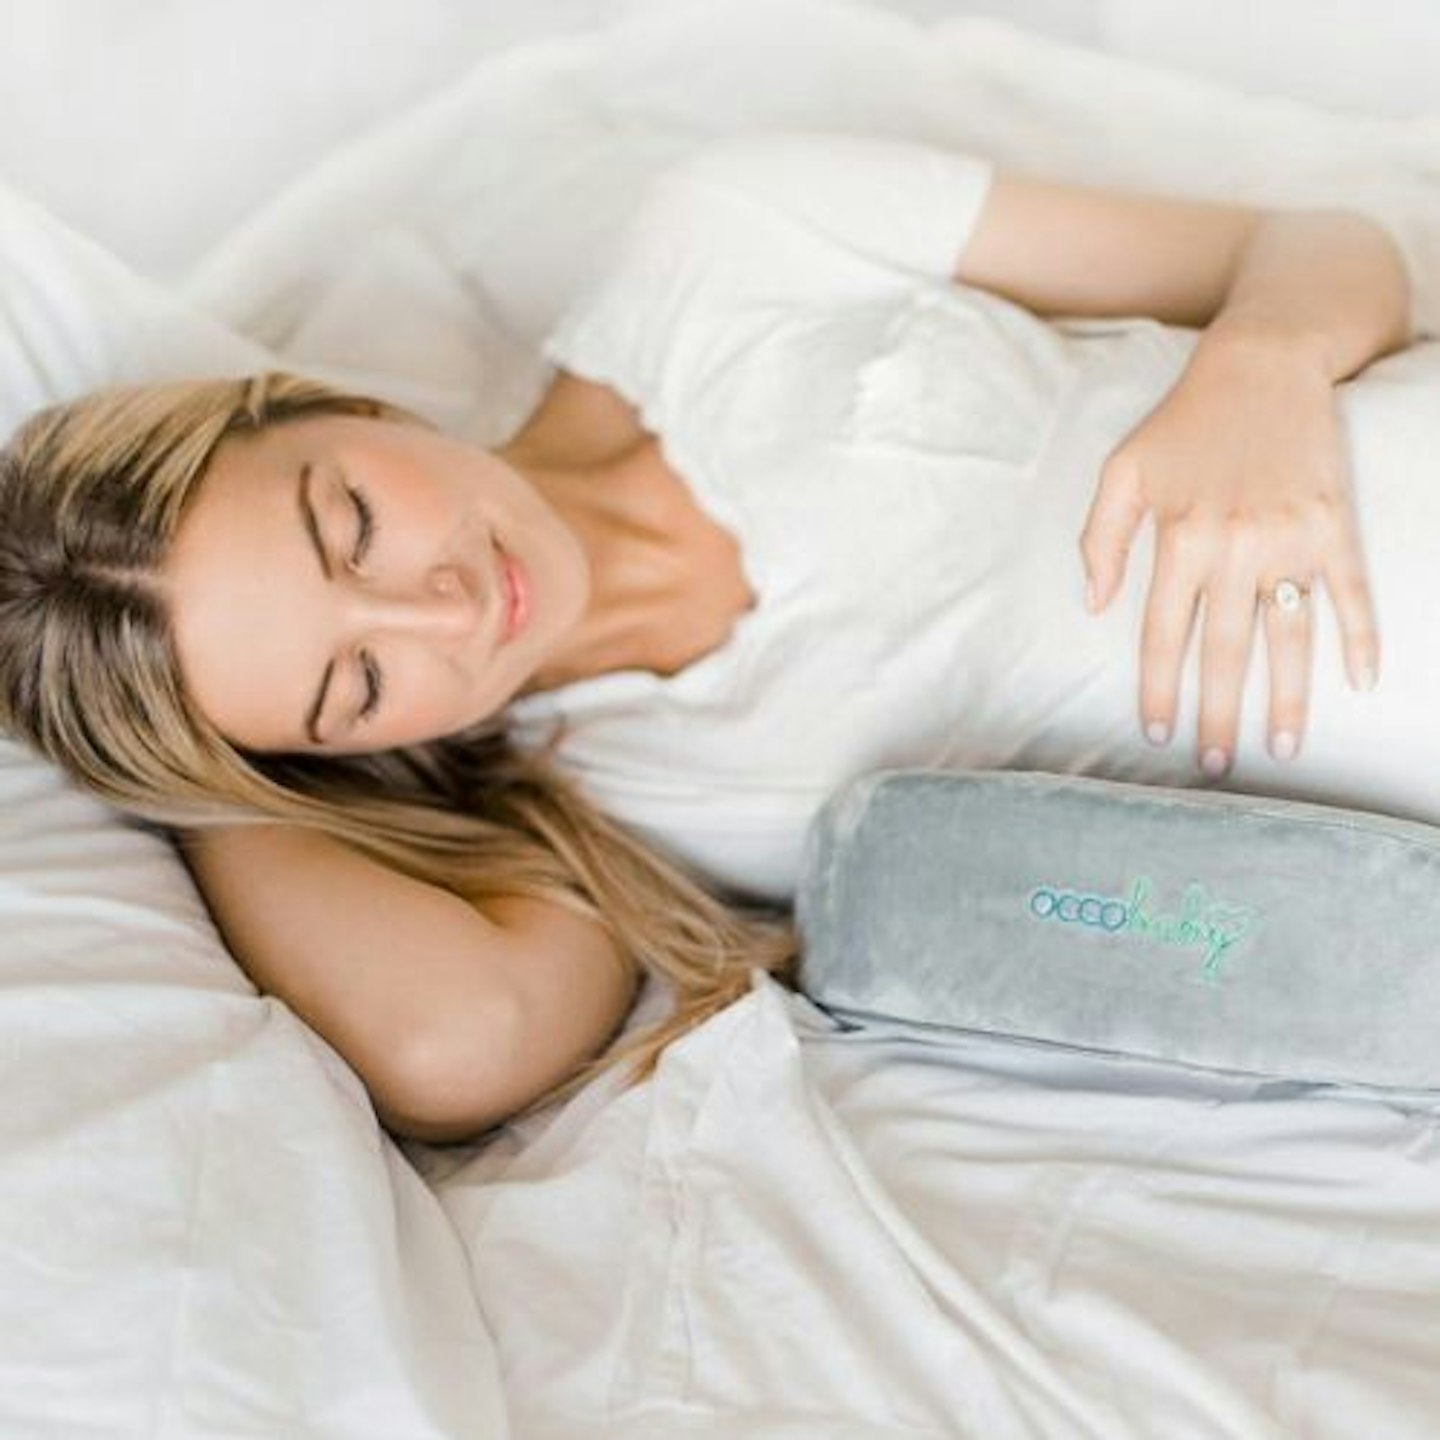 https://images.bauerhosting.com/affiliates/sites/12/2023/03/OCCObaby_Pregnancy_Wedge_Pillow_for_Sleeping.jpg?auto=format&w=1440&q=80